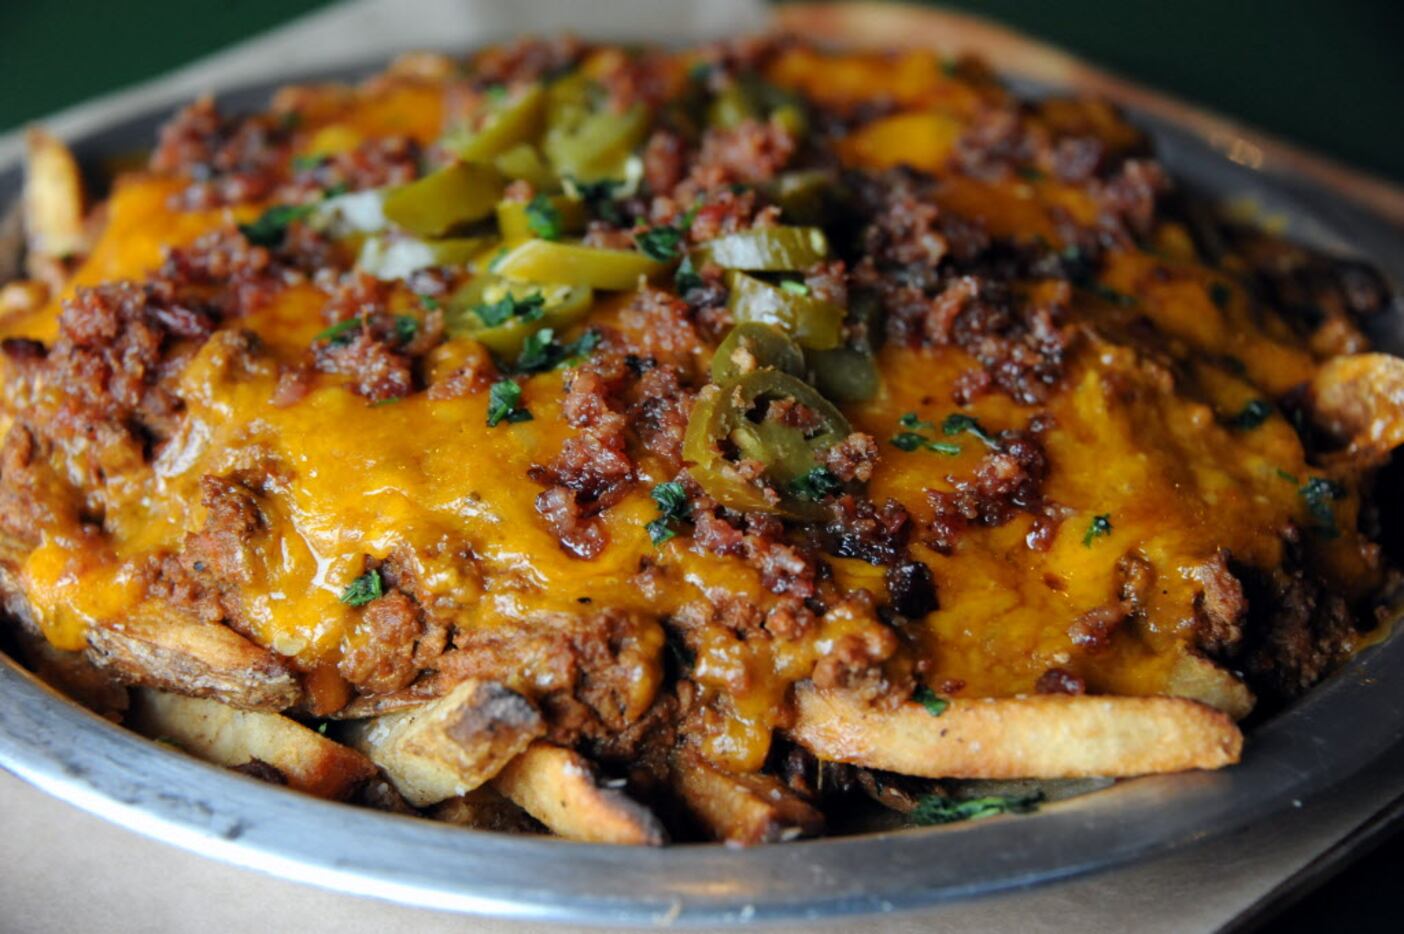 The cheese fries surprise are hand punched fries with parsley, cheddar, and house made chili...